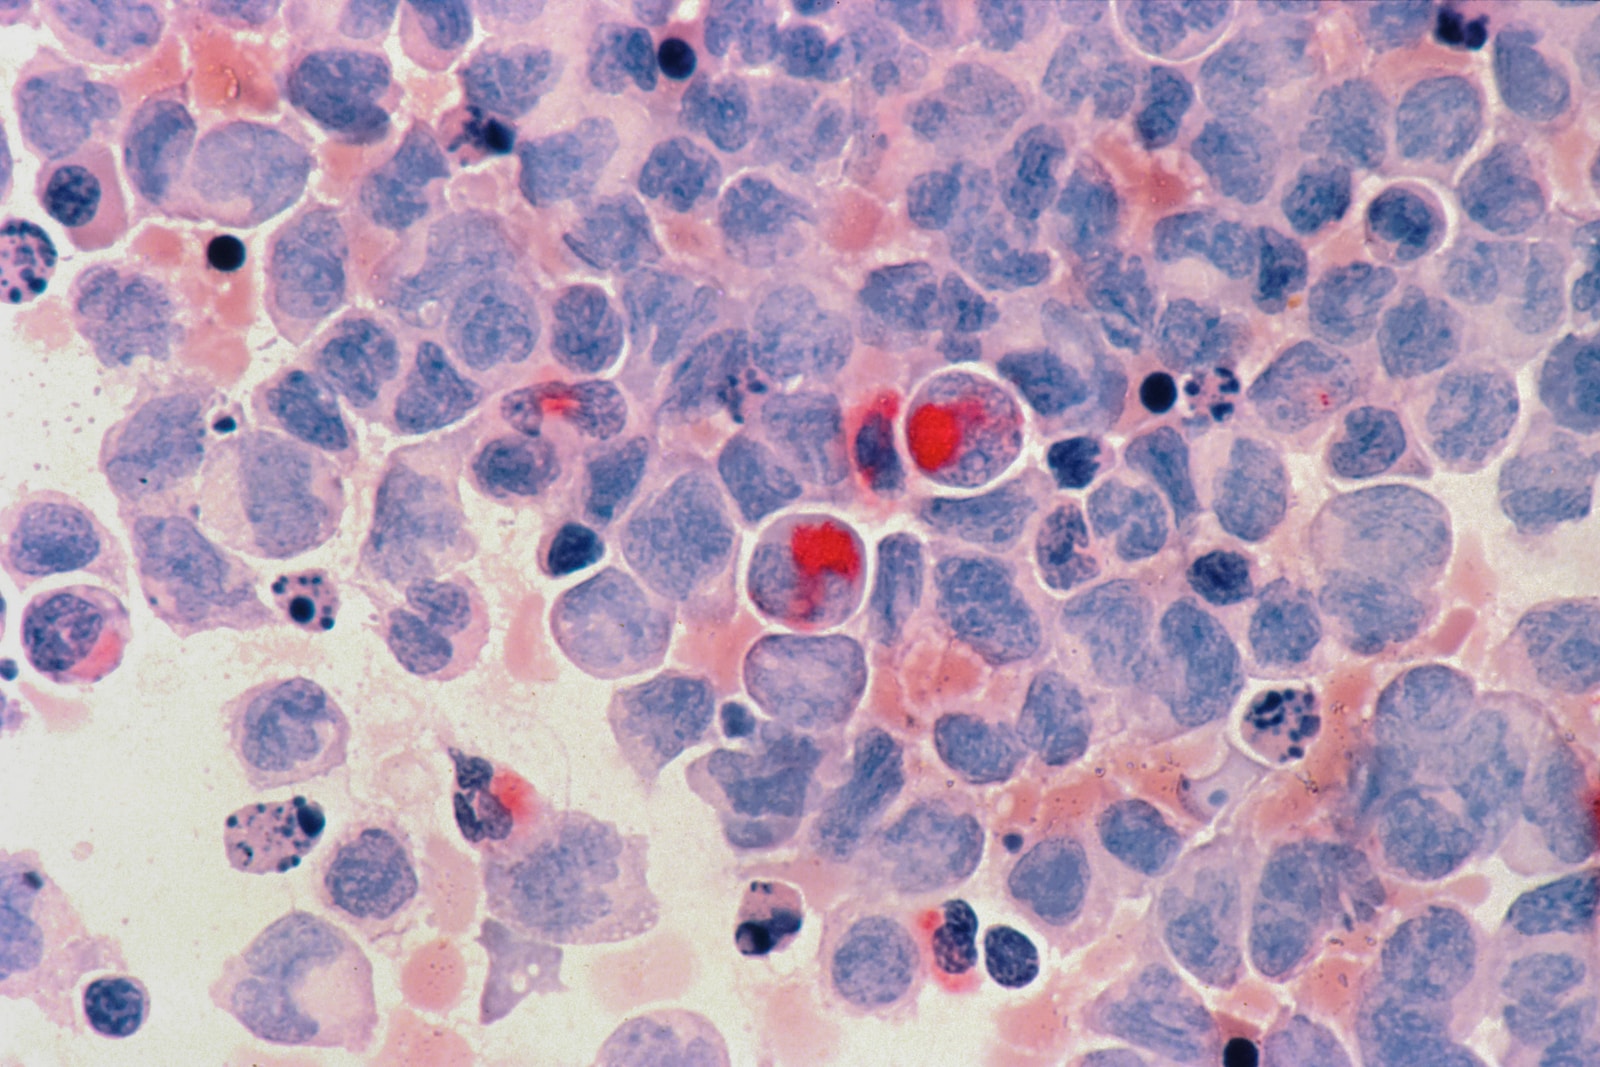 red round cells on white and blue surface